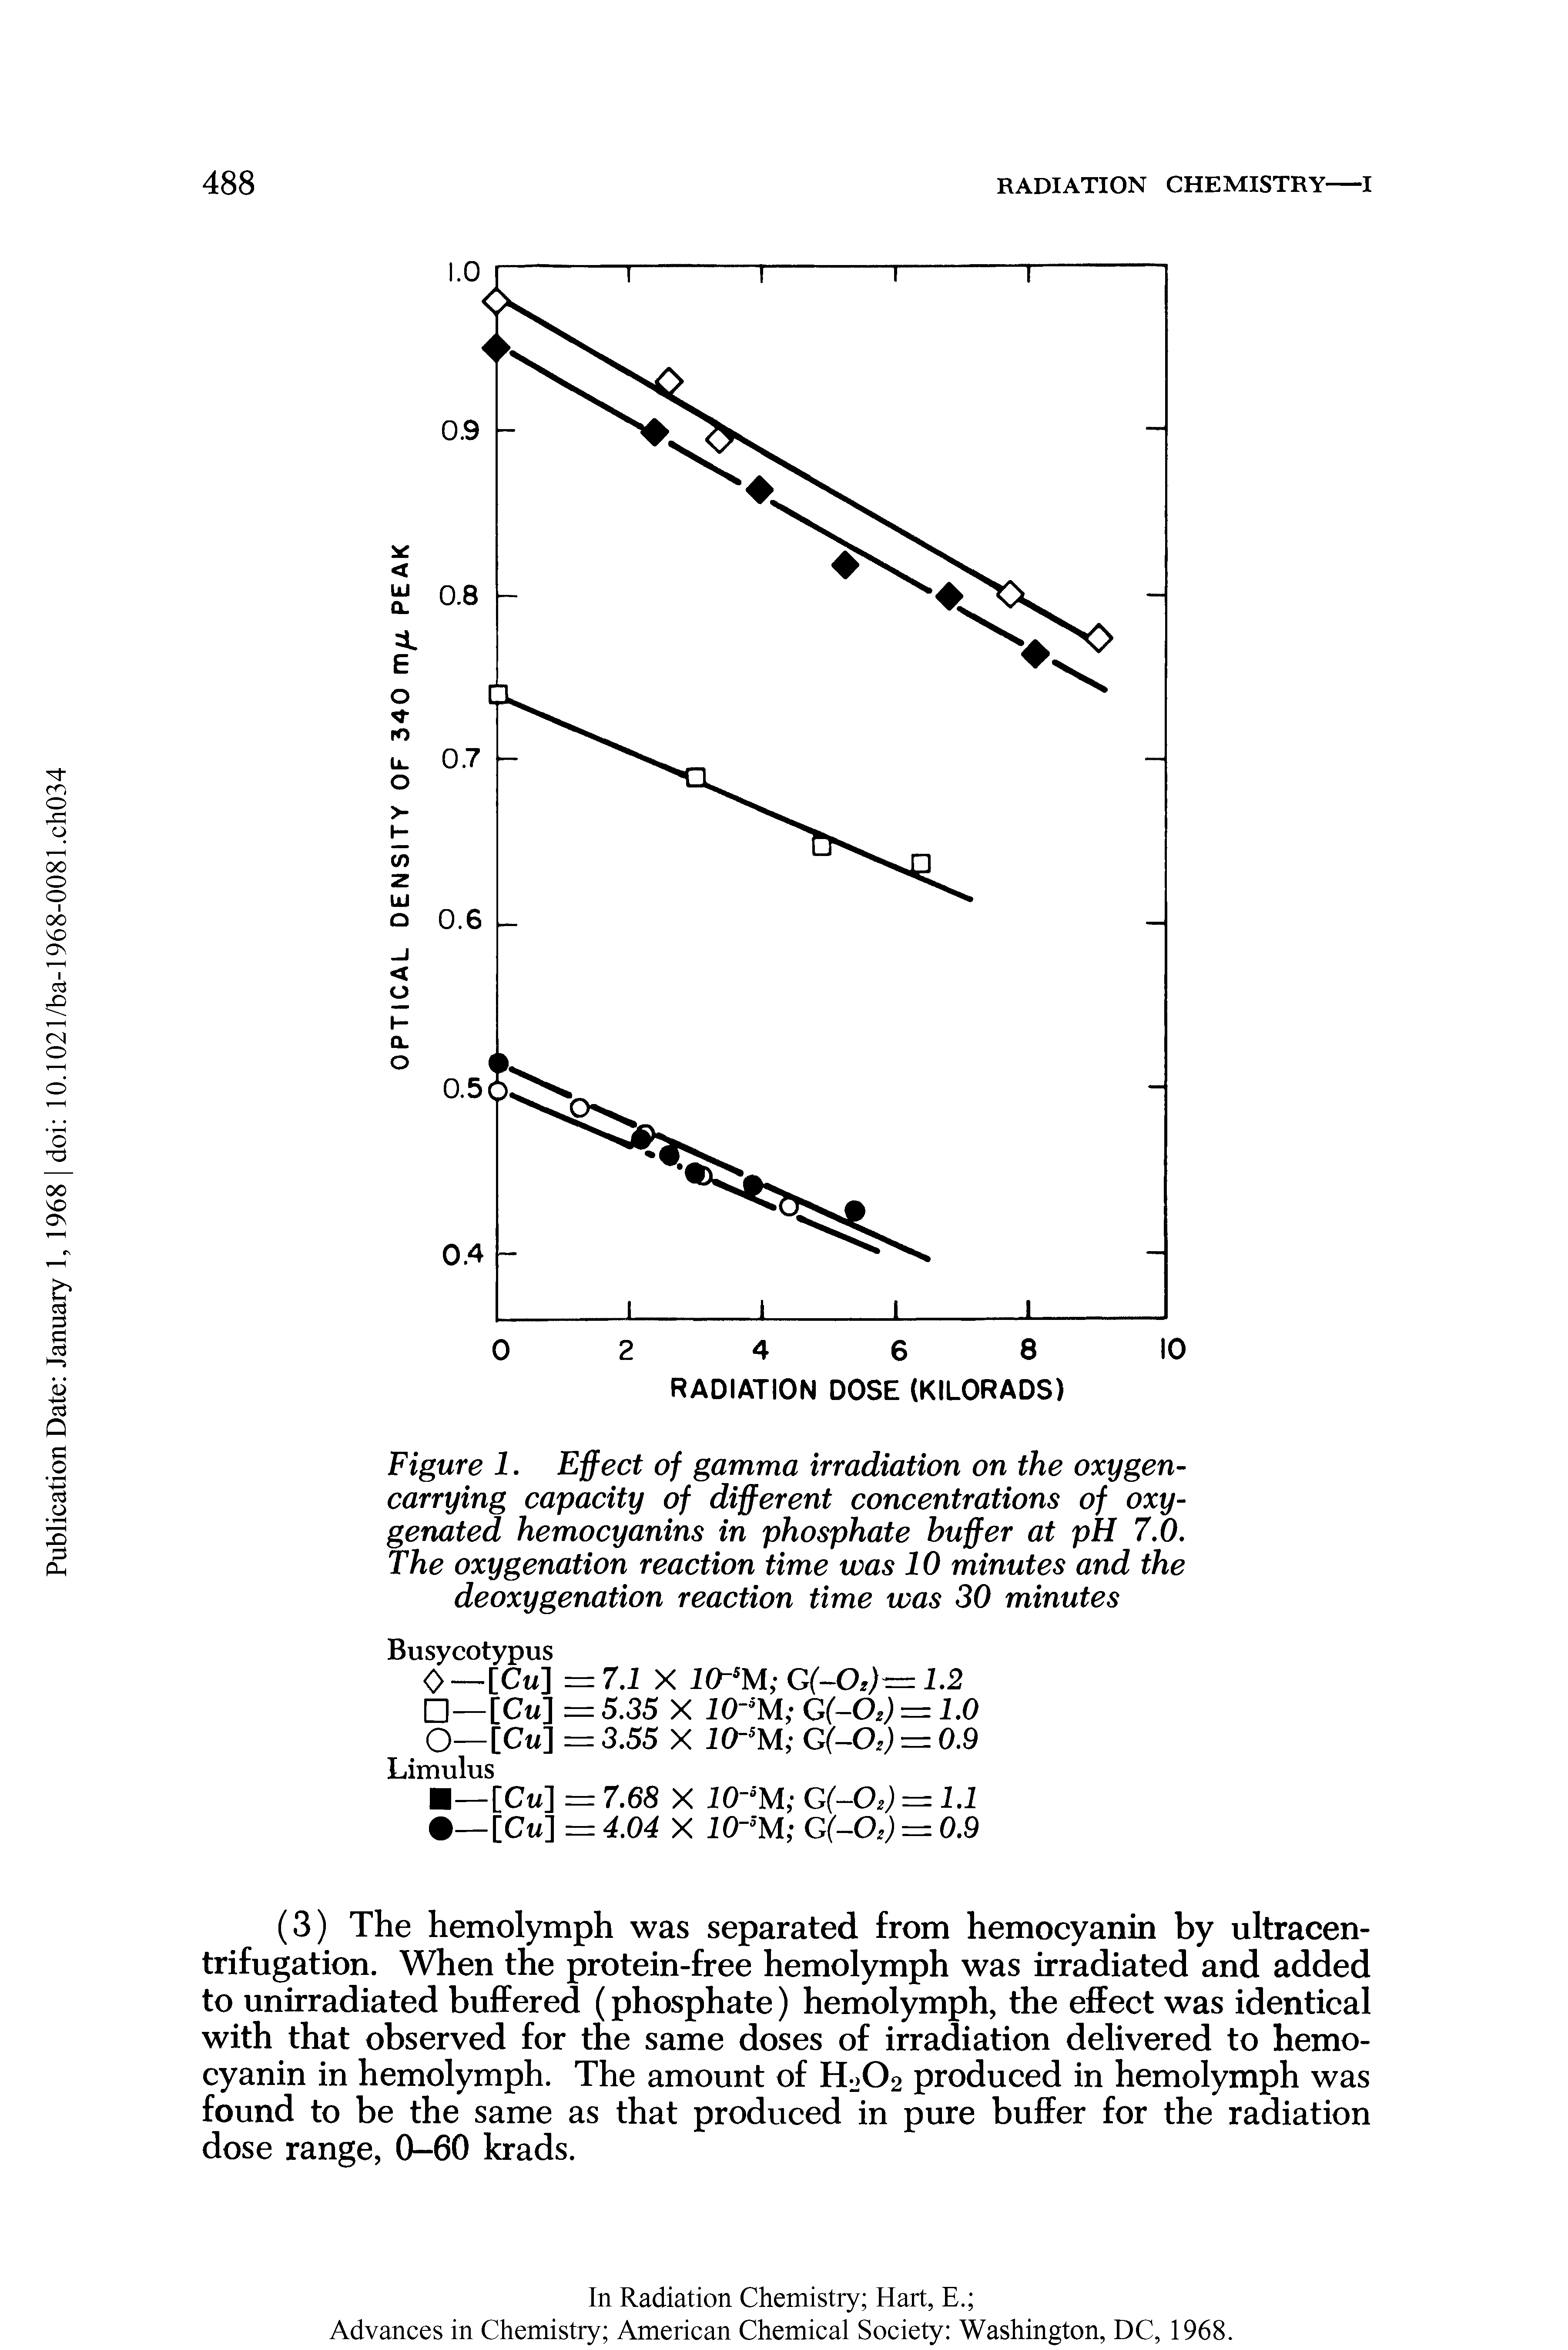 Figure 1. Effect of gamma irradiation on the oxygencarrying capacity of different concentrations of oxygenated hemocyanins in phosphate buffer at pH 7.0. The oxygenation reaction time was 10 minutes and the deoxygenation reaction time was 30 minutes...